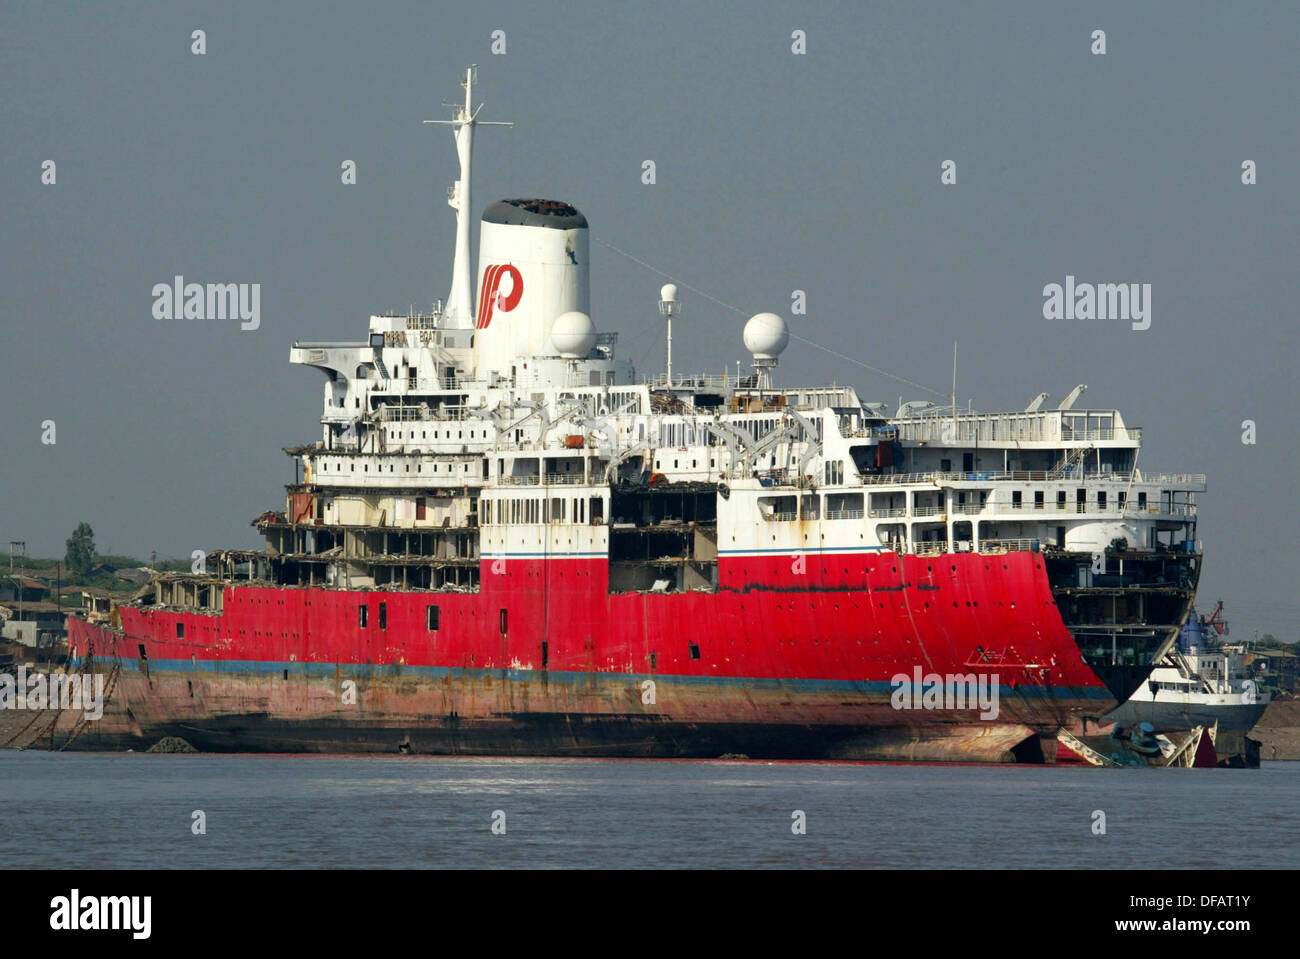 A ship is being dismantled in the worlds largest shipbreaking yard in Alang, India. Stock Photo